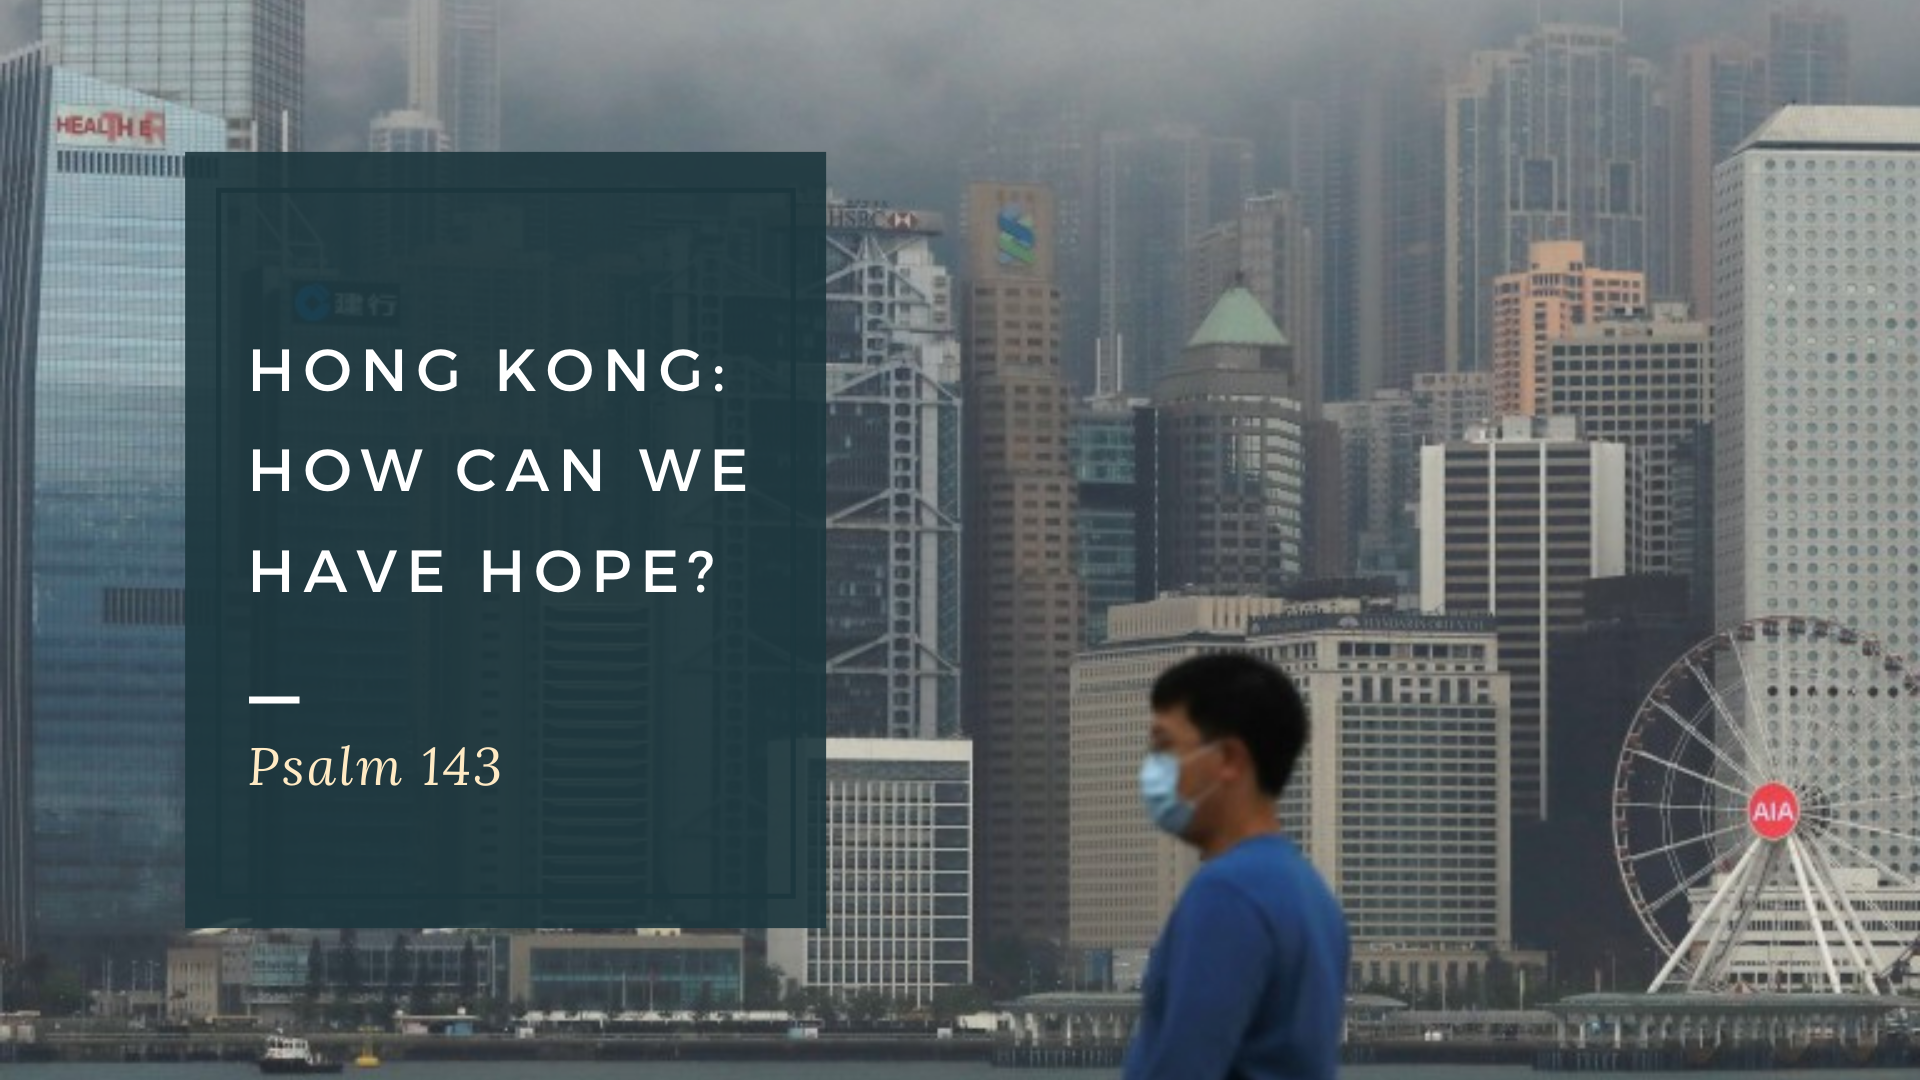 Hong Kong: How Can We Have Hope?